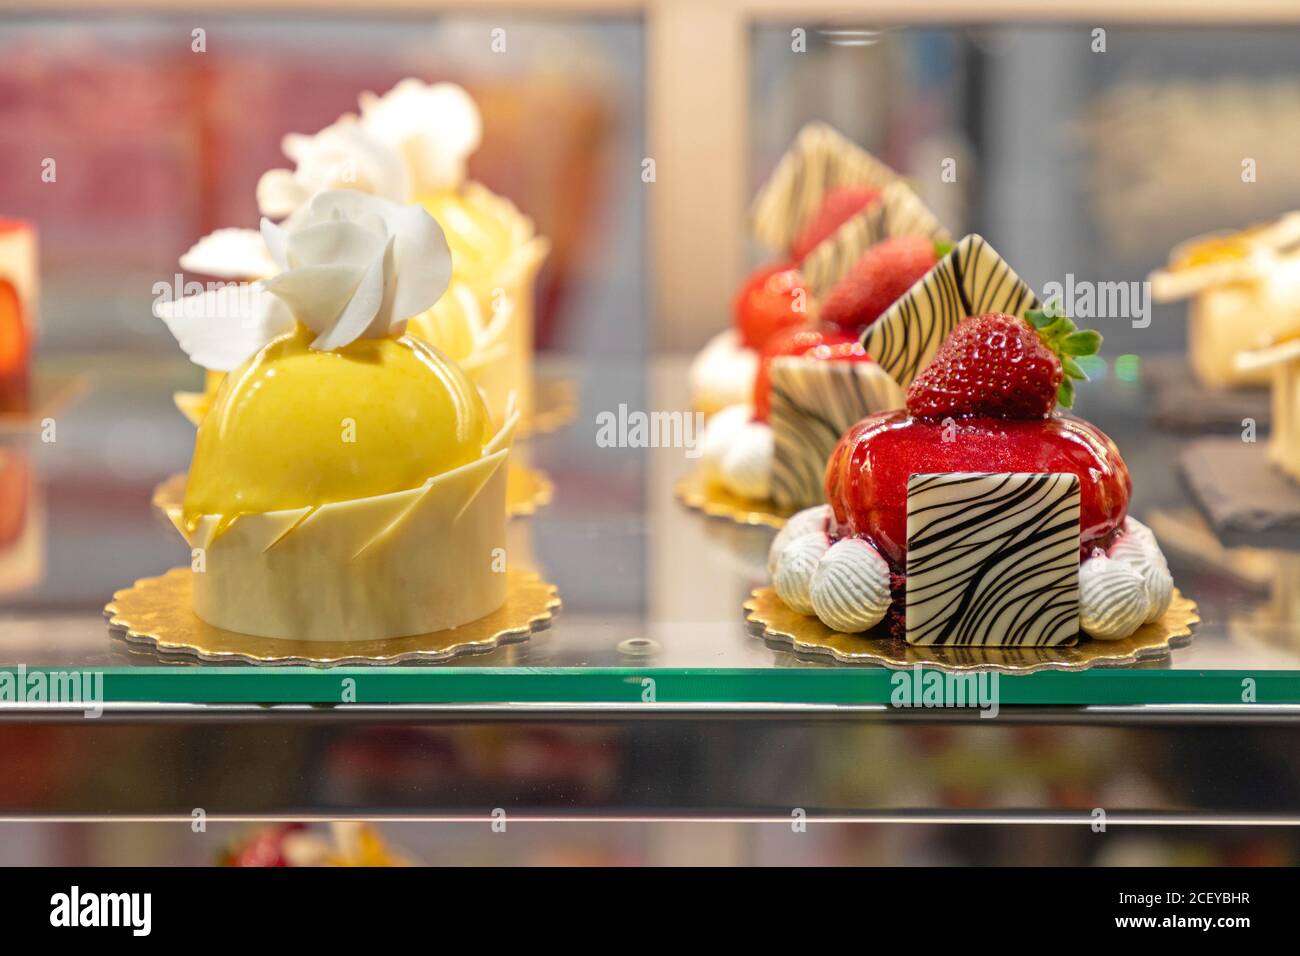 Assortment of Culinary Art Cakes in Patisserie Display Stock Photo